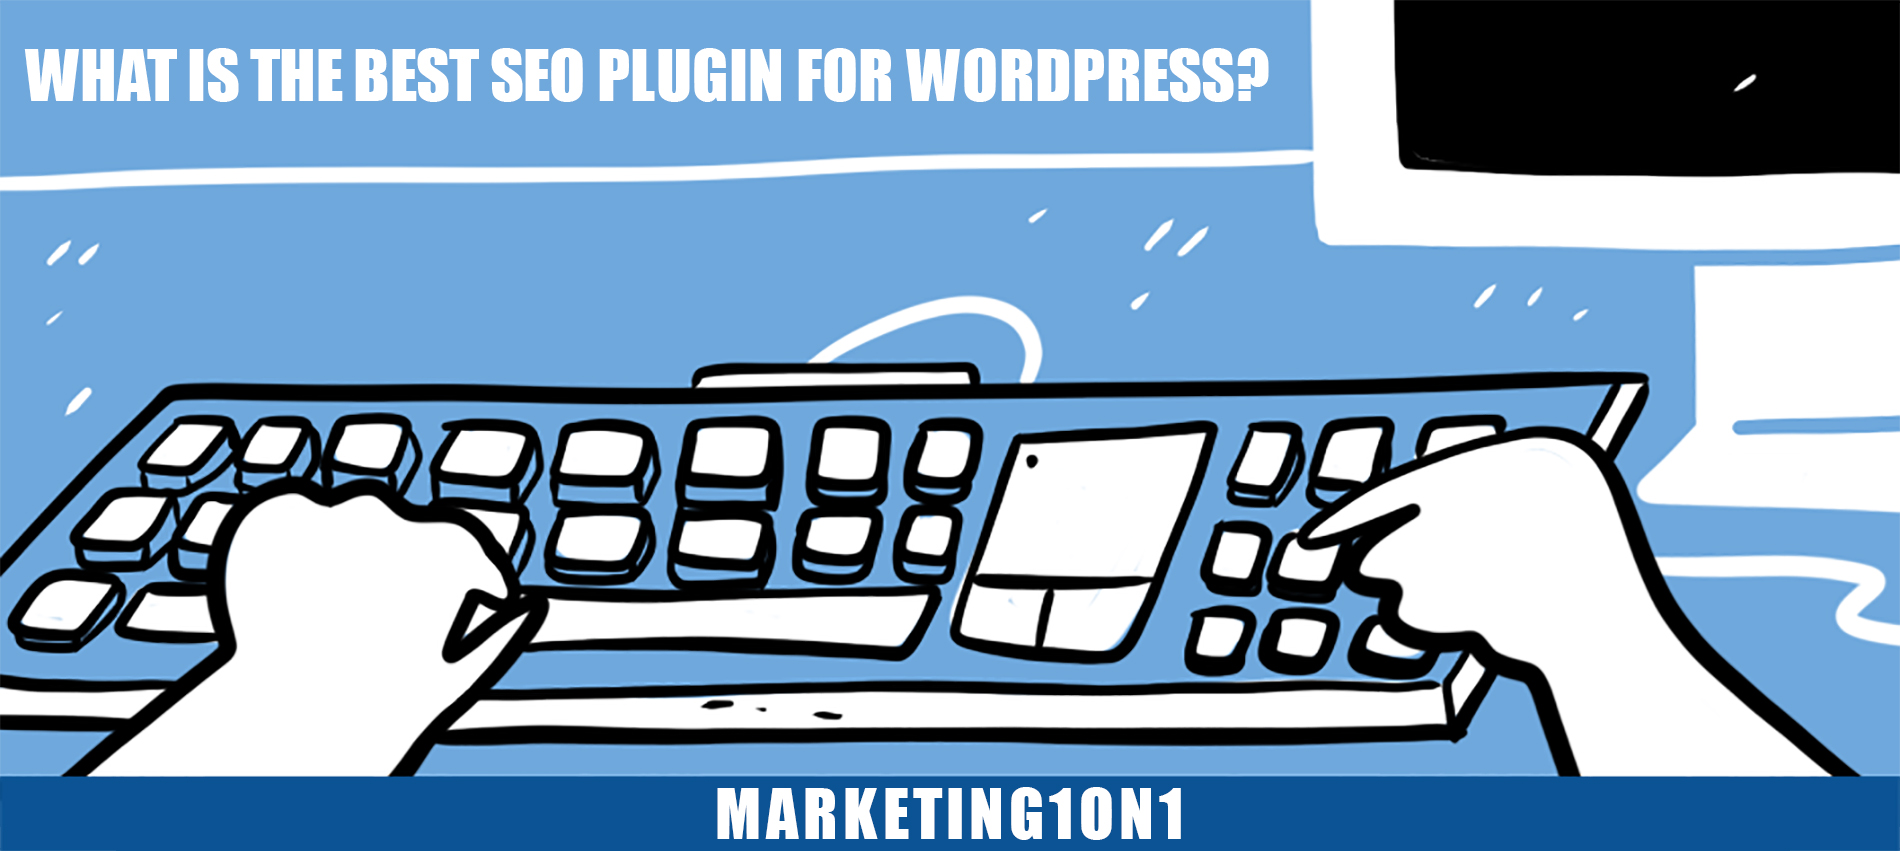 What is the best SEO plugin for WordPress?